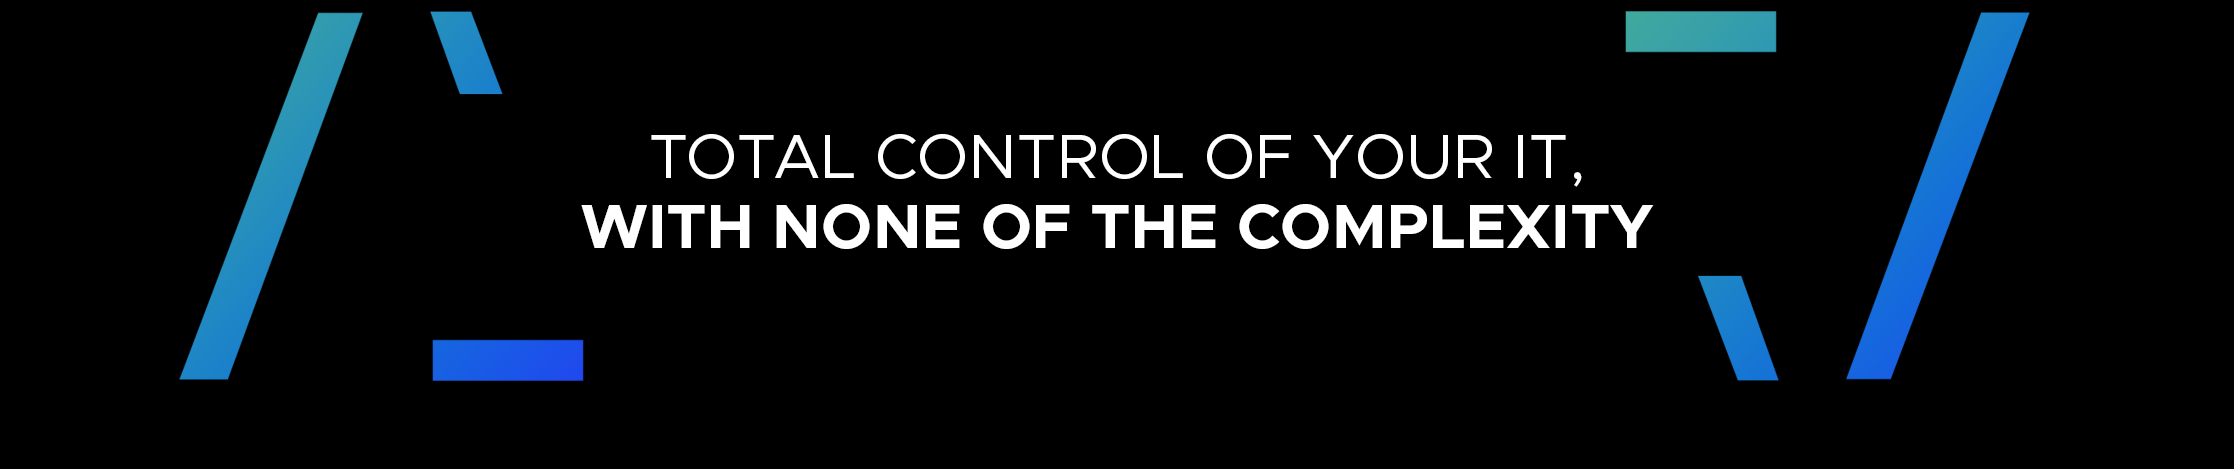 TOTAL CONTROL OF YOUR IT, WITH NONE OF THE COMPLEXITY